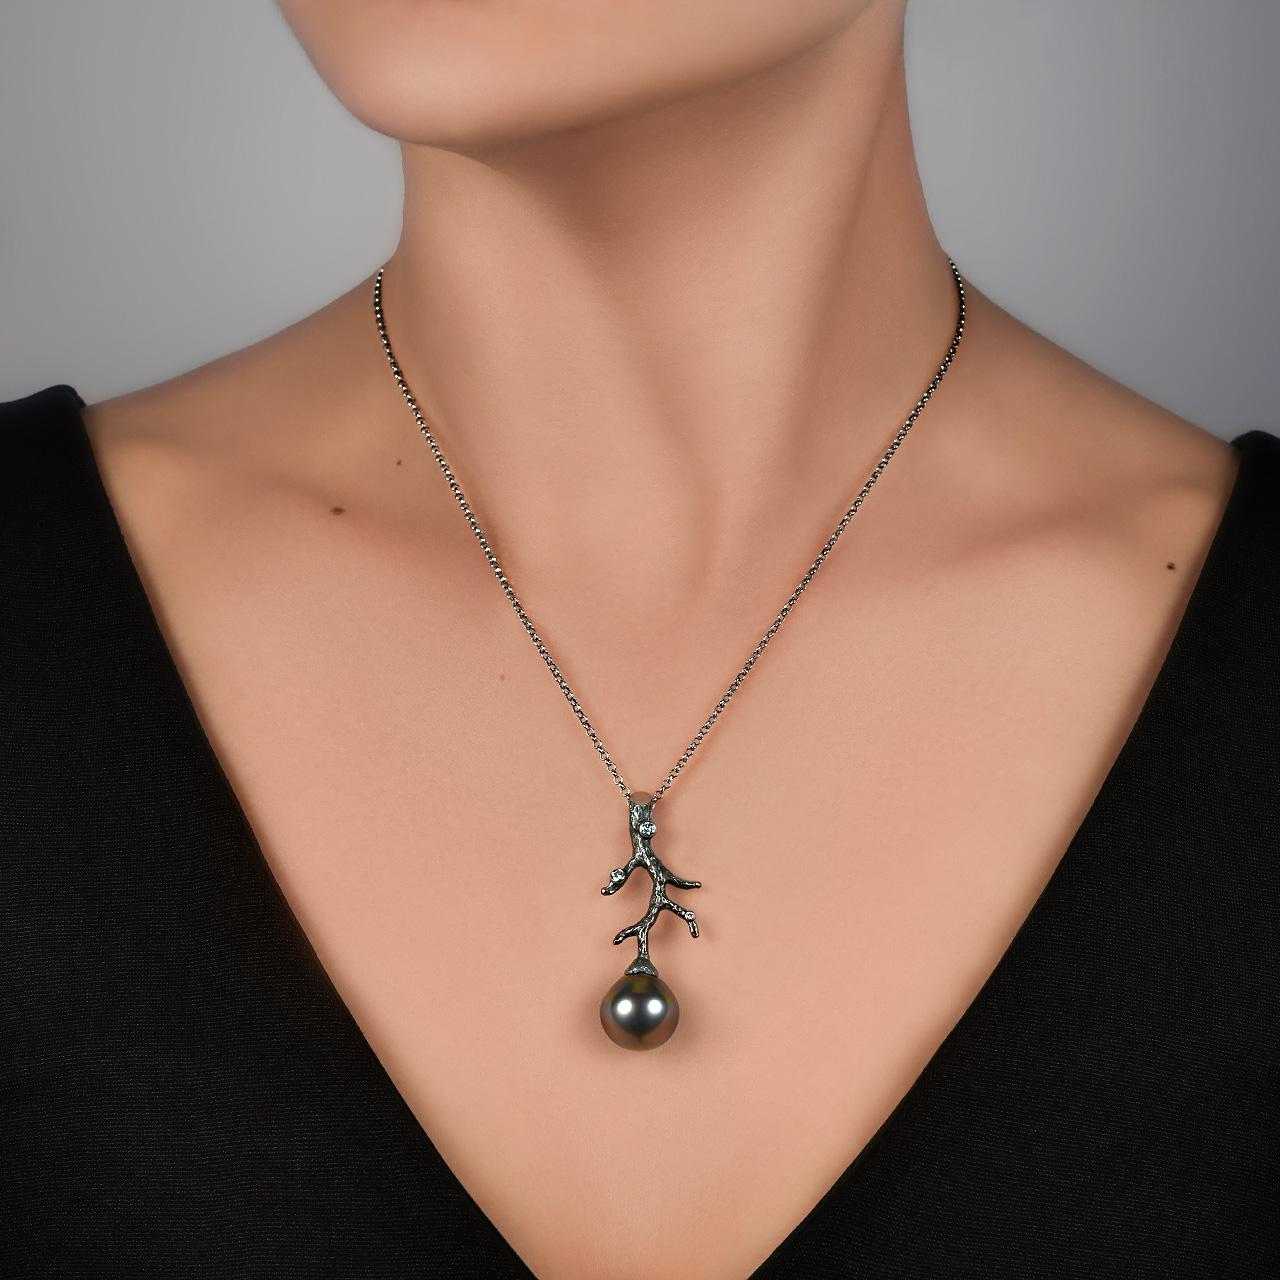 - 3 Round Diamonds - 0.14 ct, G/VVS1-VS1
- 14.70*15.12 mm Pear-shaped Dark Tahitian pearl
- 18K White Gold 
- Weight: 10.12 g
This pendant from the Eden collection features a lustrous Dark Tahitian pearl. The design is complete with 3 diamonds